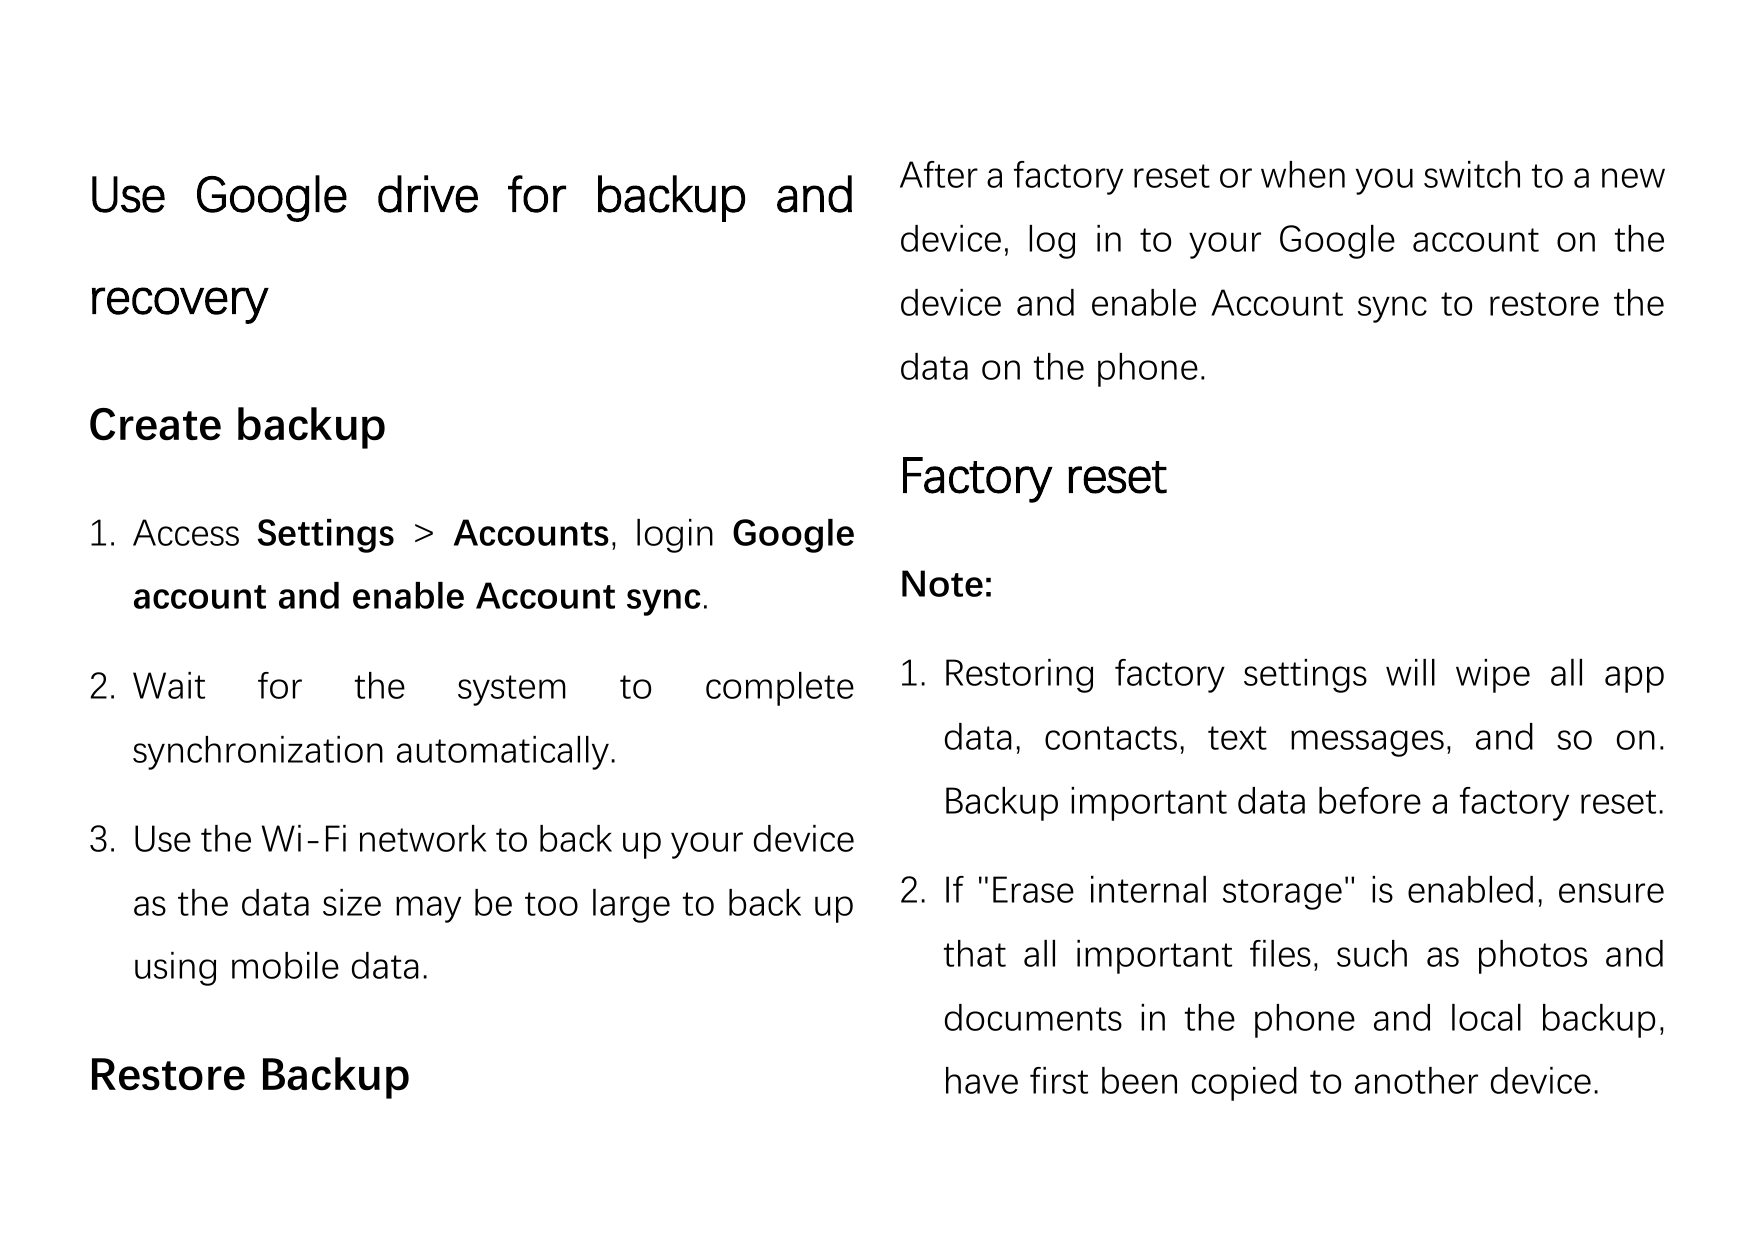 Use Google drive for backup andAfter a factory reset or when you switch to a newrecoverydevice and enable Account sync to restor